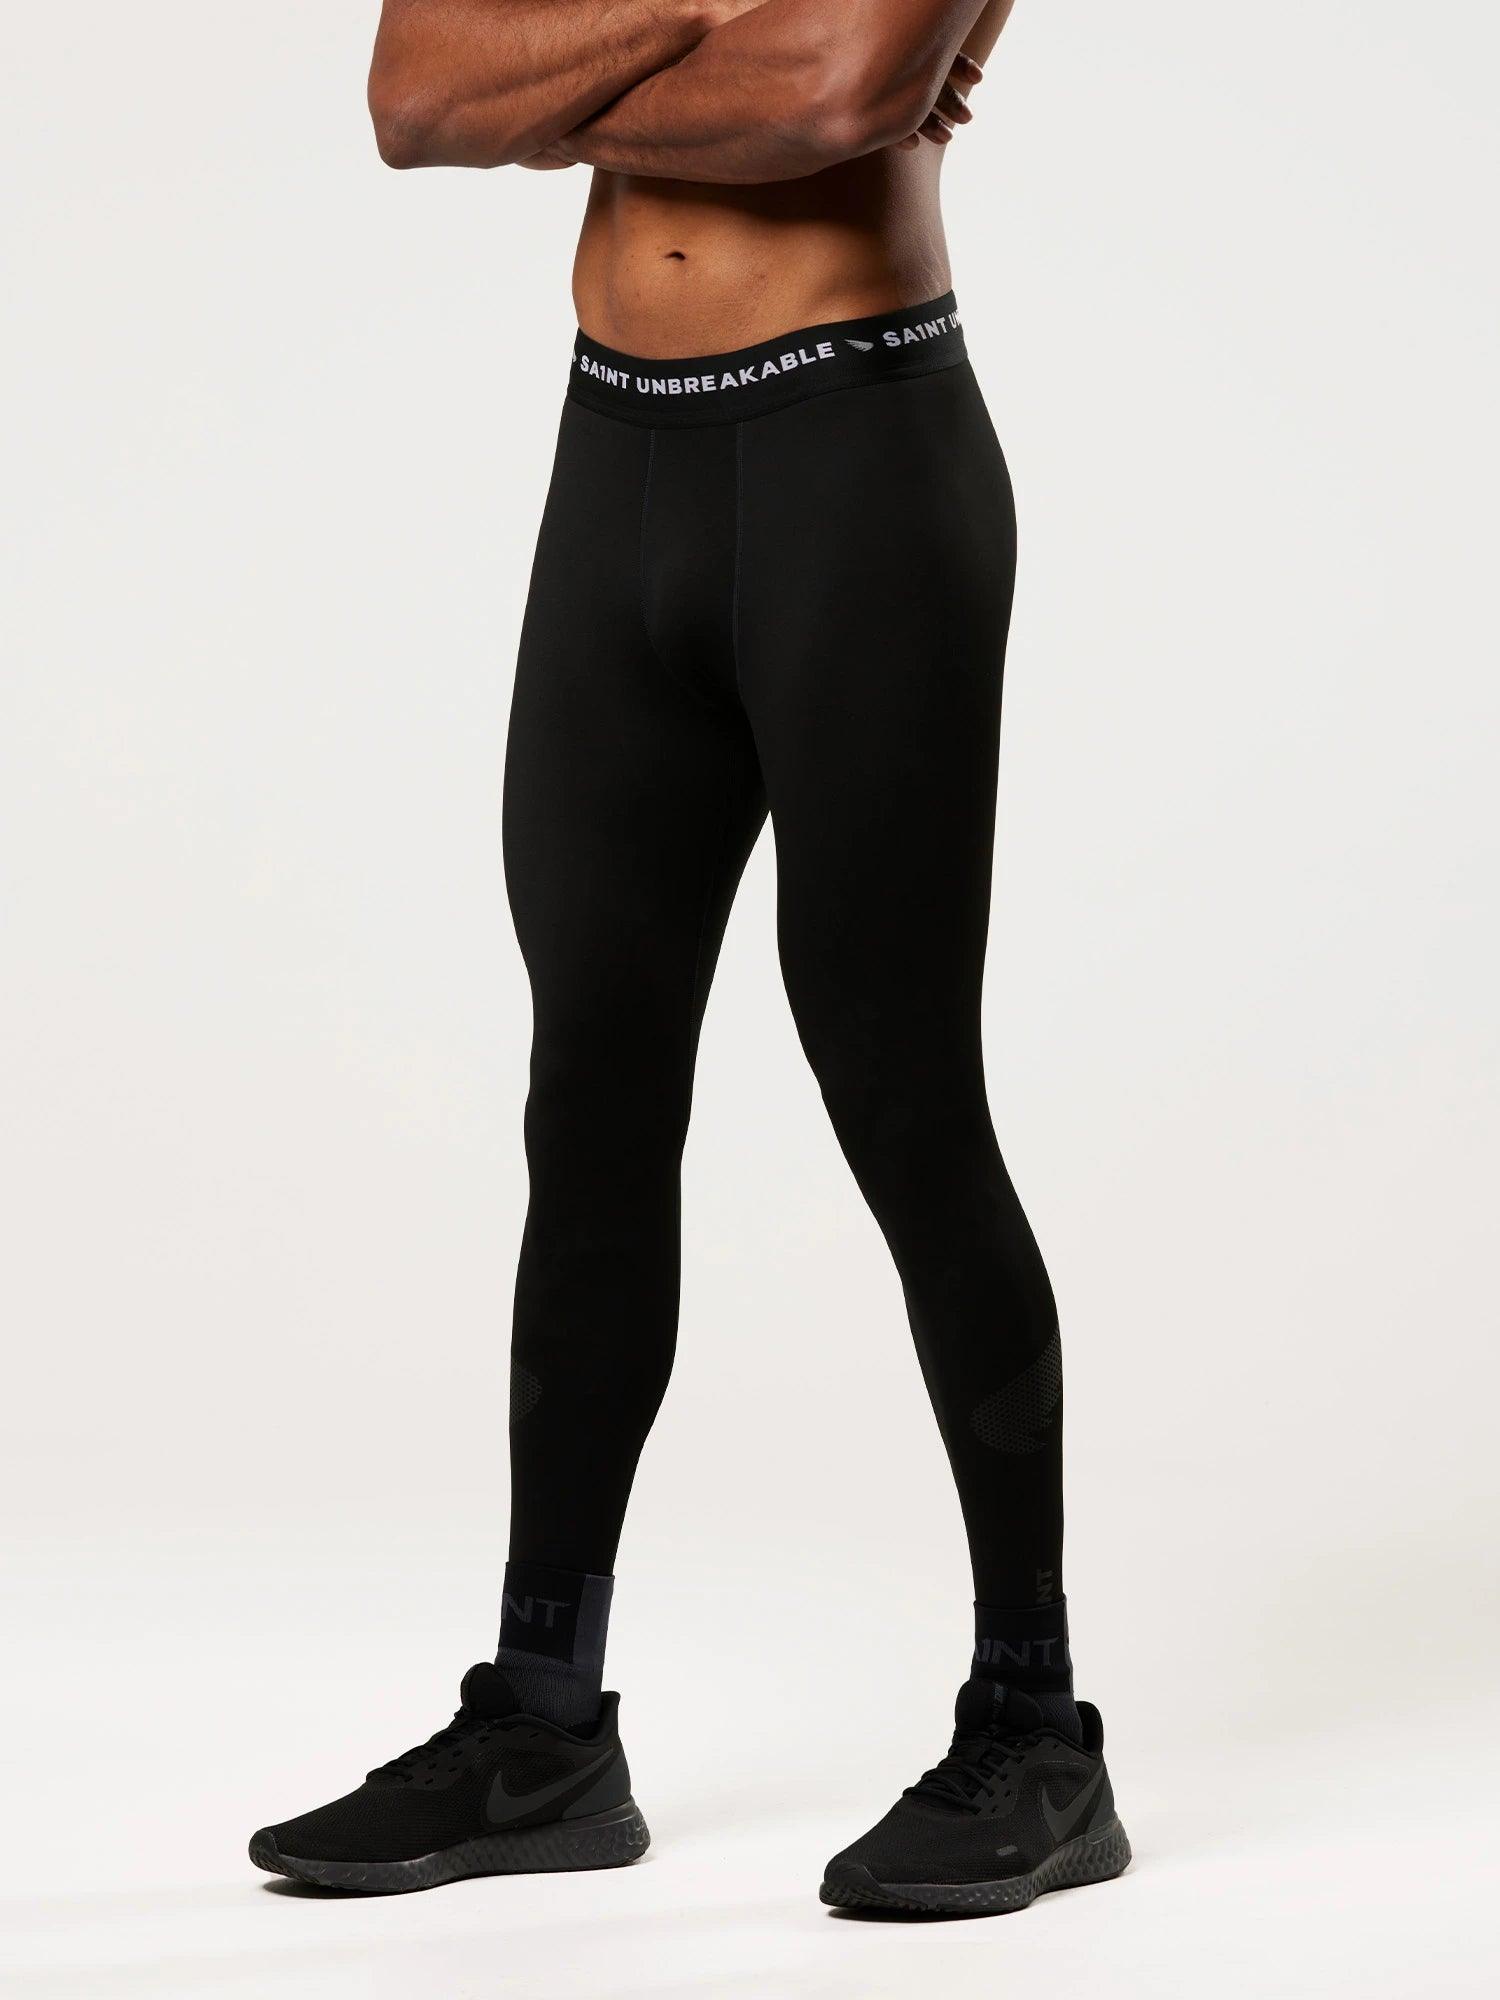 Men's Recovery Compression Tights - Black | SA1NT LAYERS